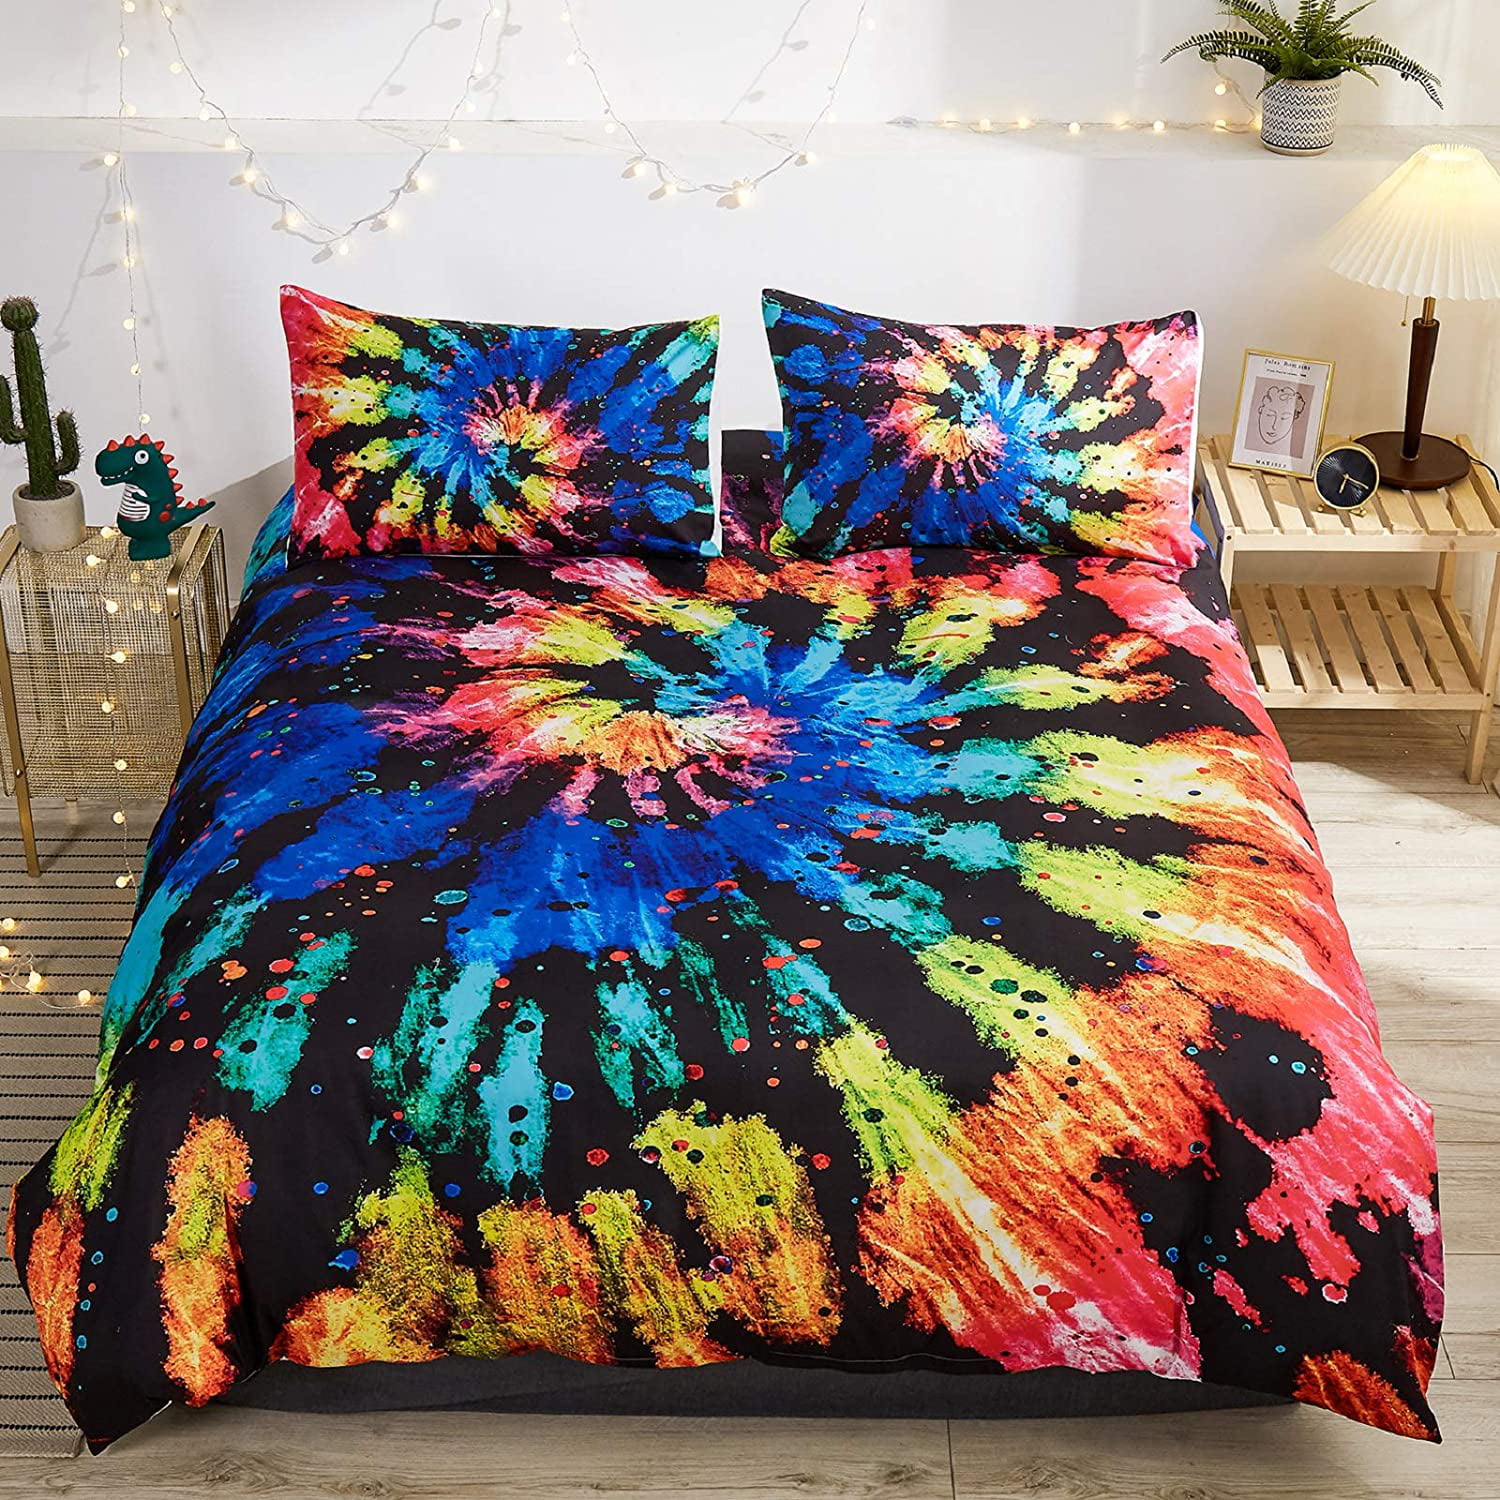 Bedding Duvet Cover Set Twin With, How To Stuff A Duvet Cover With Ties